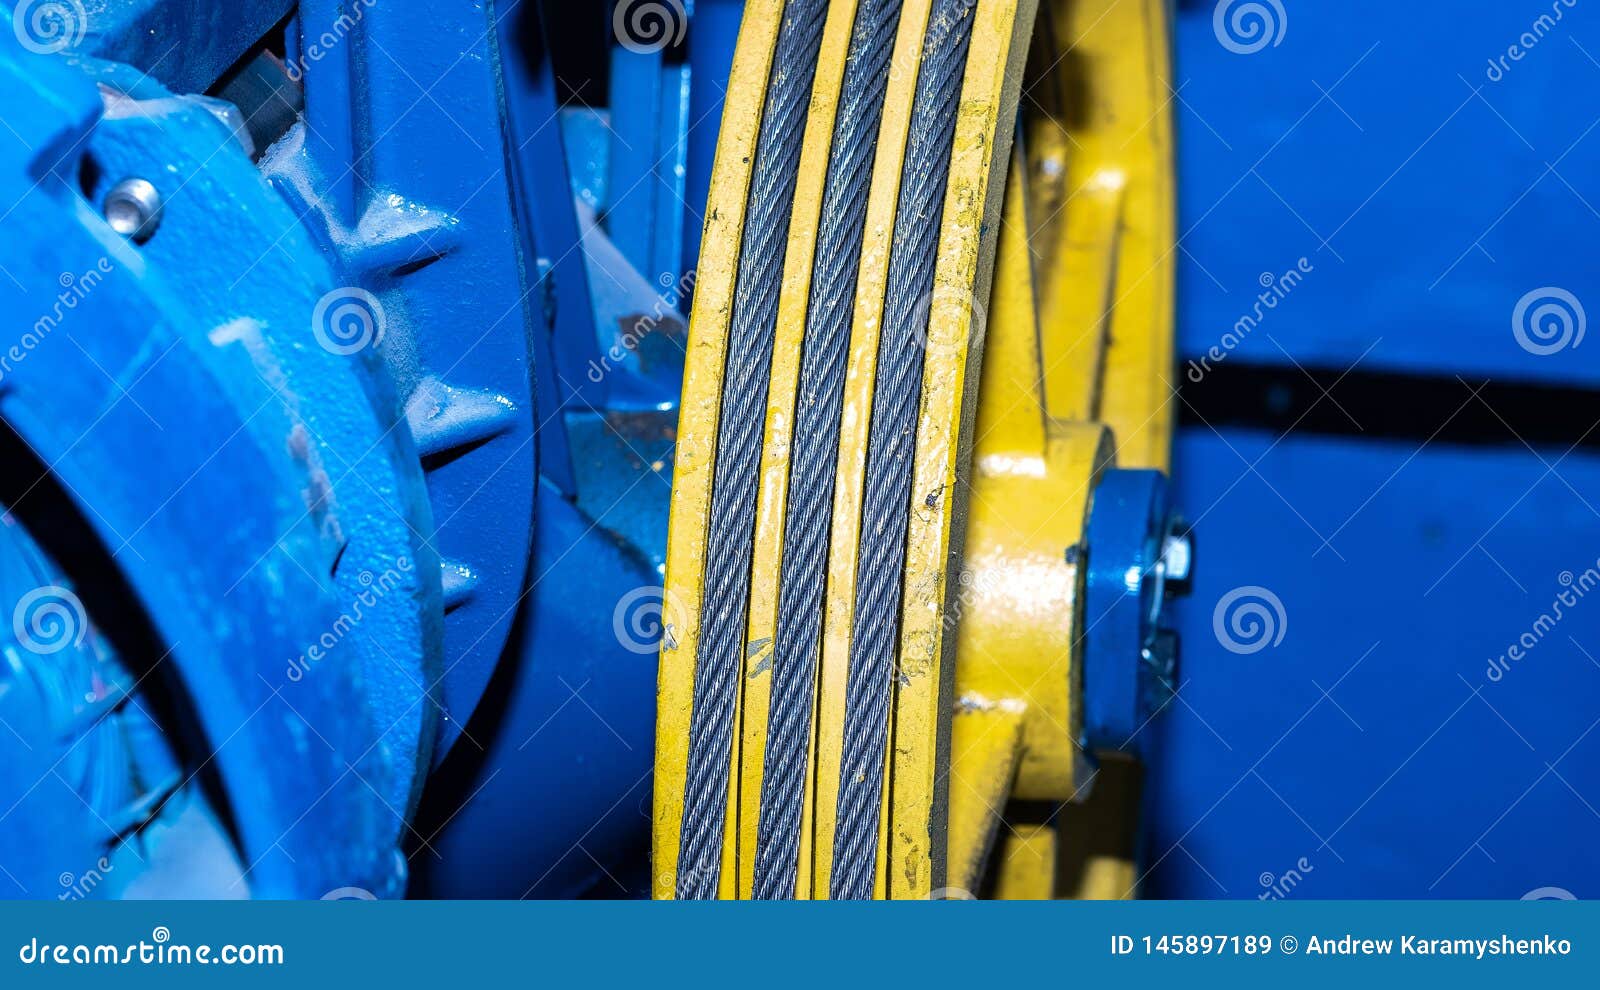 Wire Rope In The Sheave Groove For Lifting Equipment Stock Image Image of circle, double